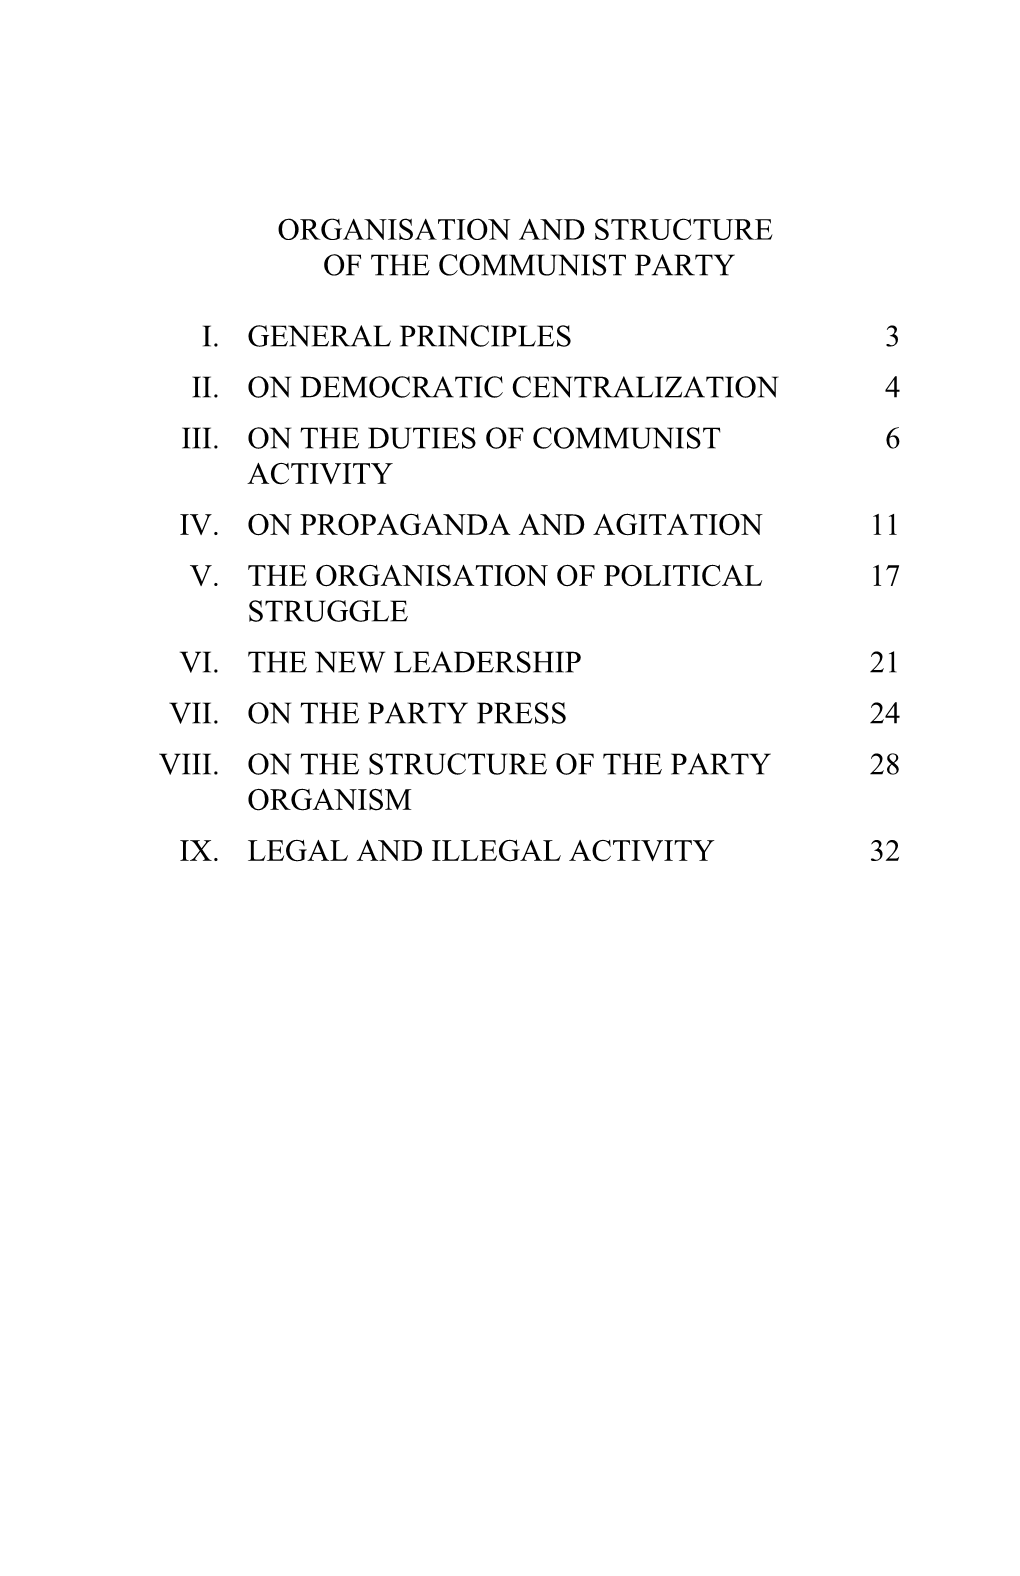 Principles of Party Organisation Comintern 1921